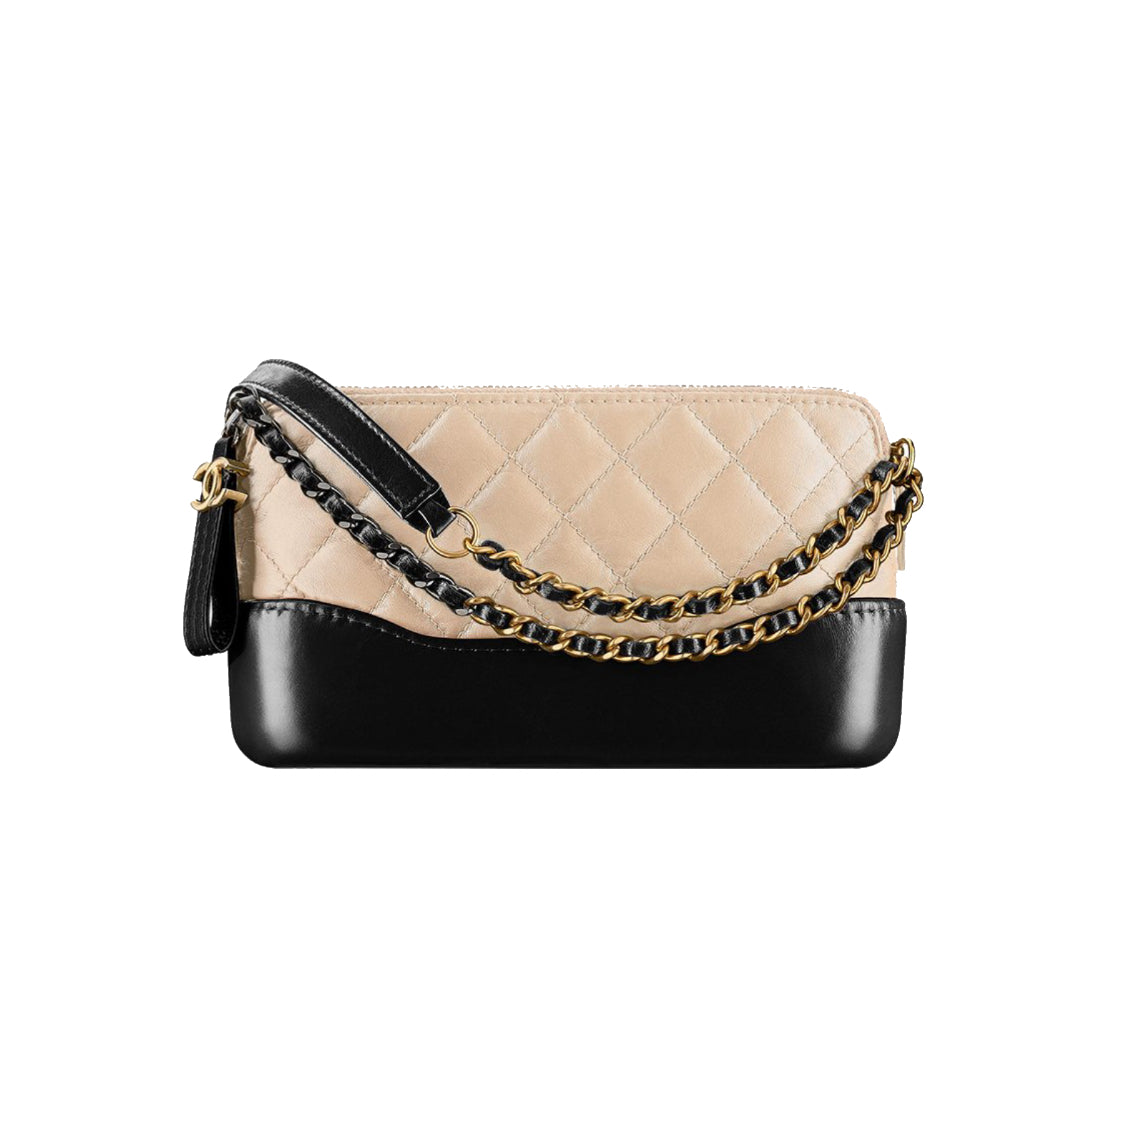 CHANEL, Bags, Chanel Gabrielle Clutch With Chain Silver